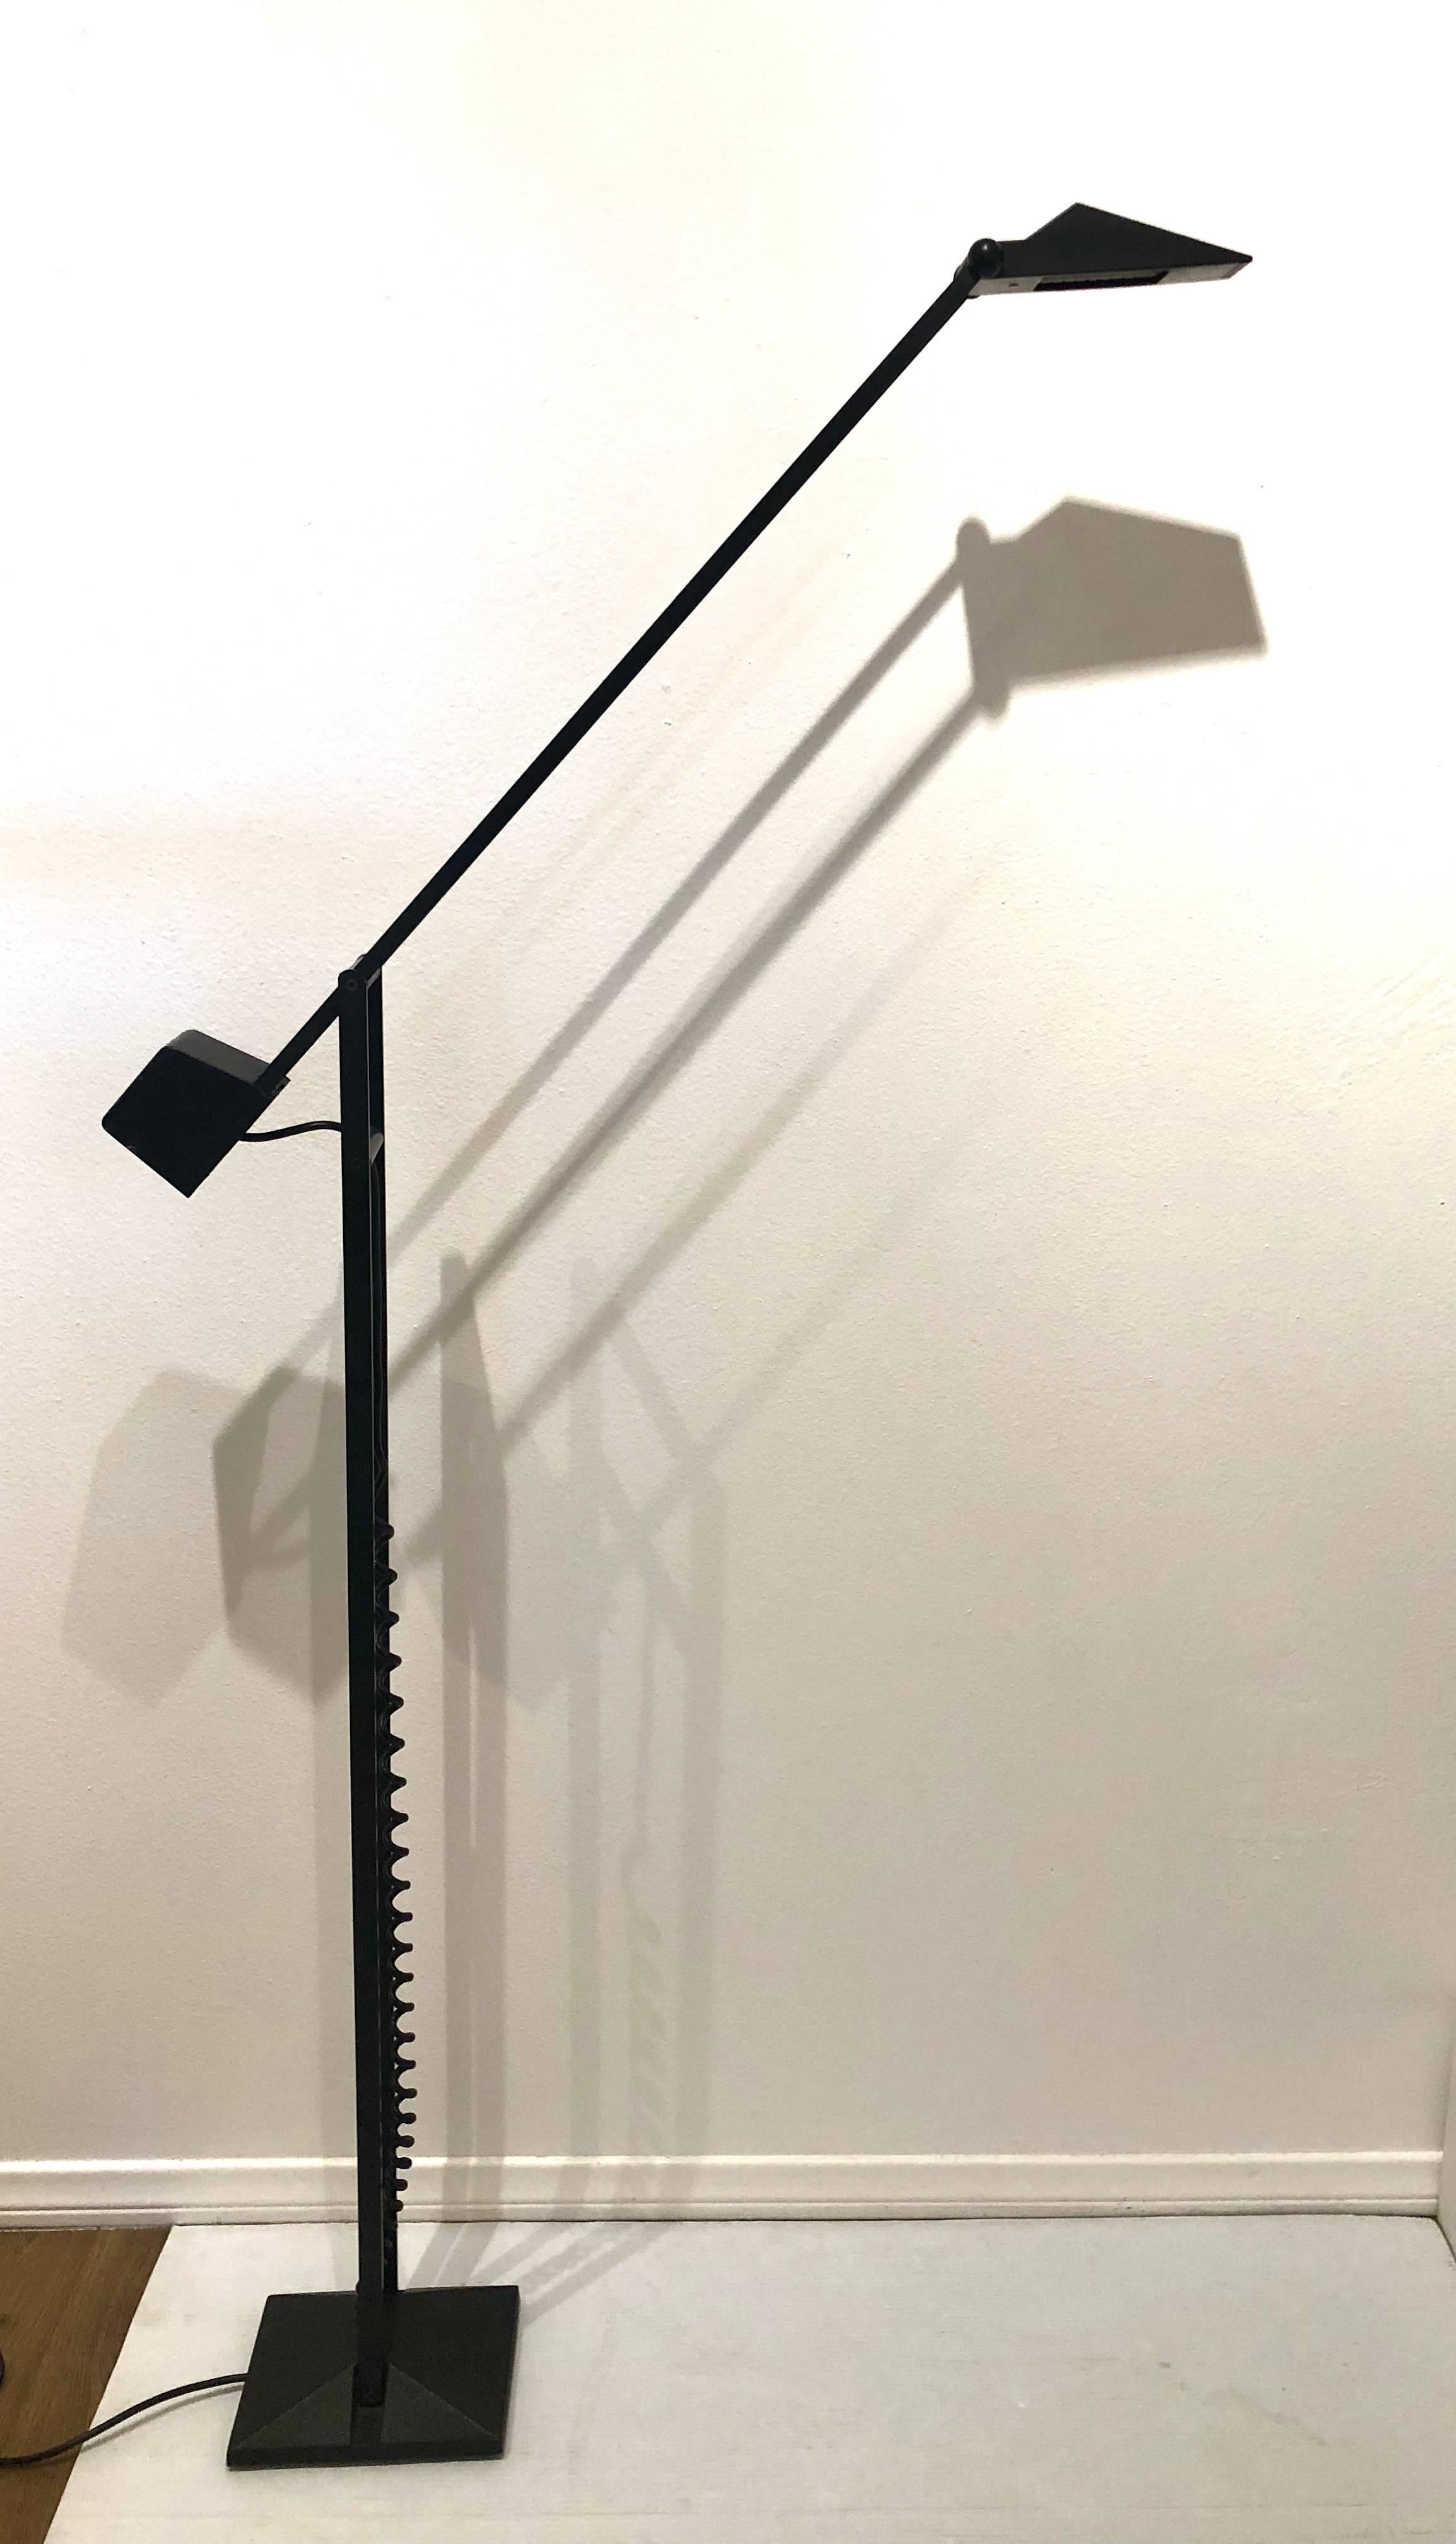 Architectural Postmodern articulated floor lamp by Artup, circa 1980s. Memphis era in black enameled steel and cast iron standing lamp is designed with numerous articulating pivot points allowing for various configurations great design a piece of